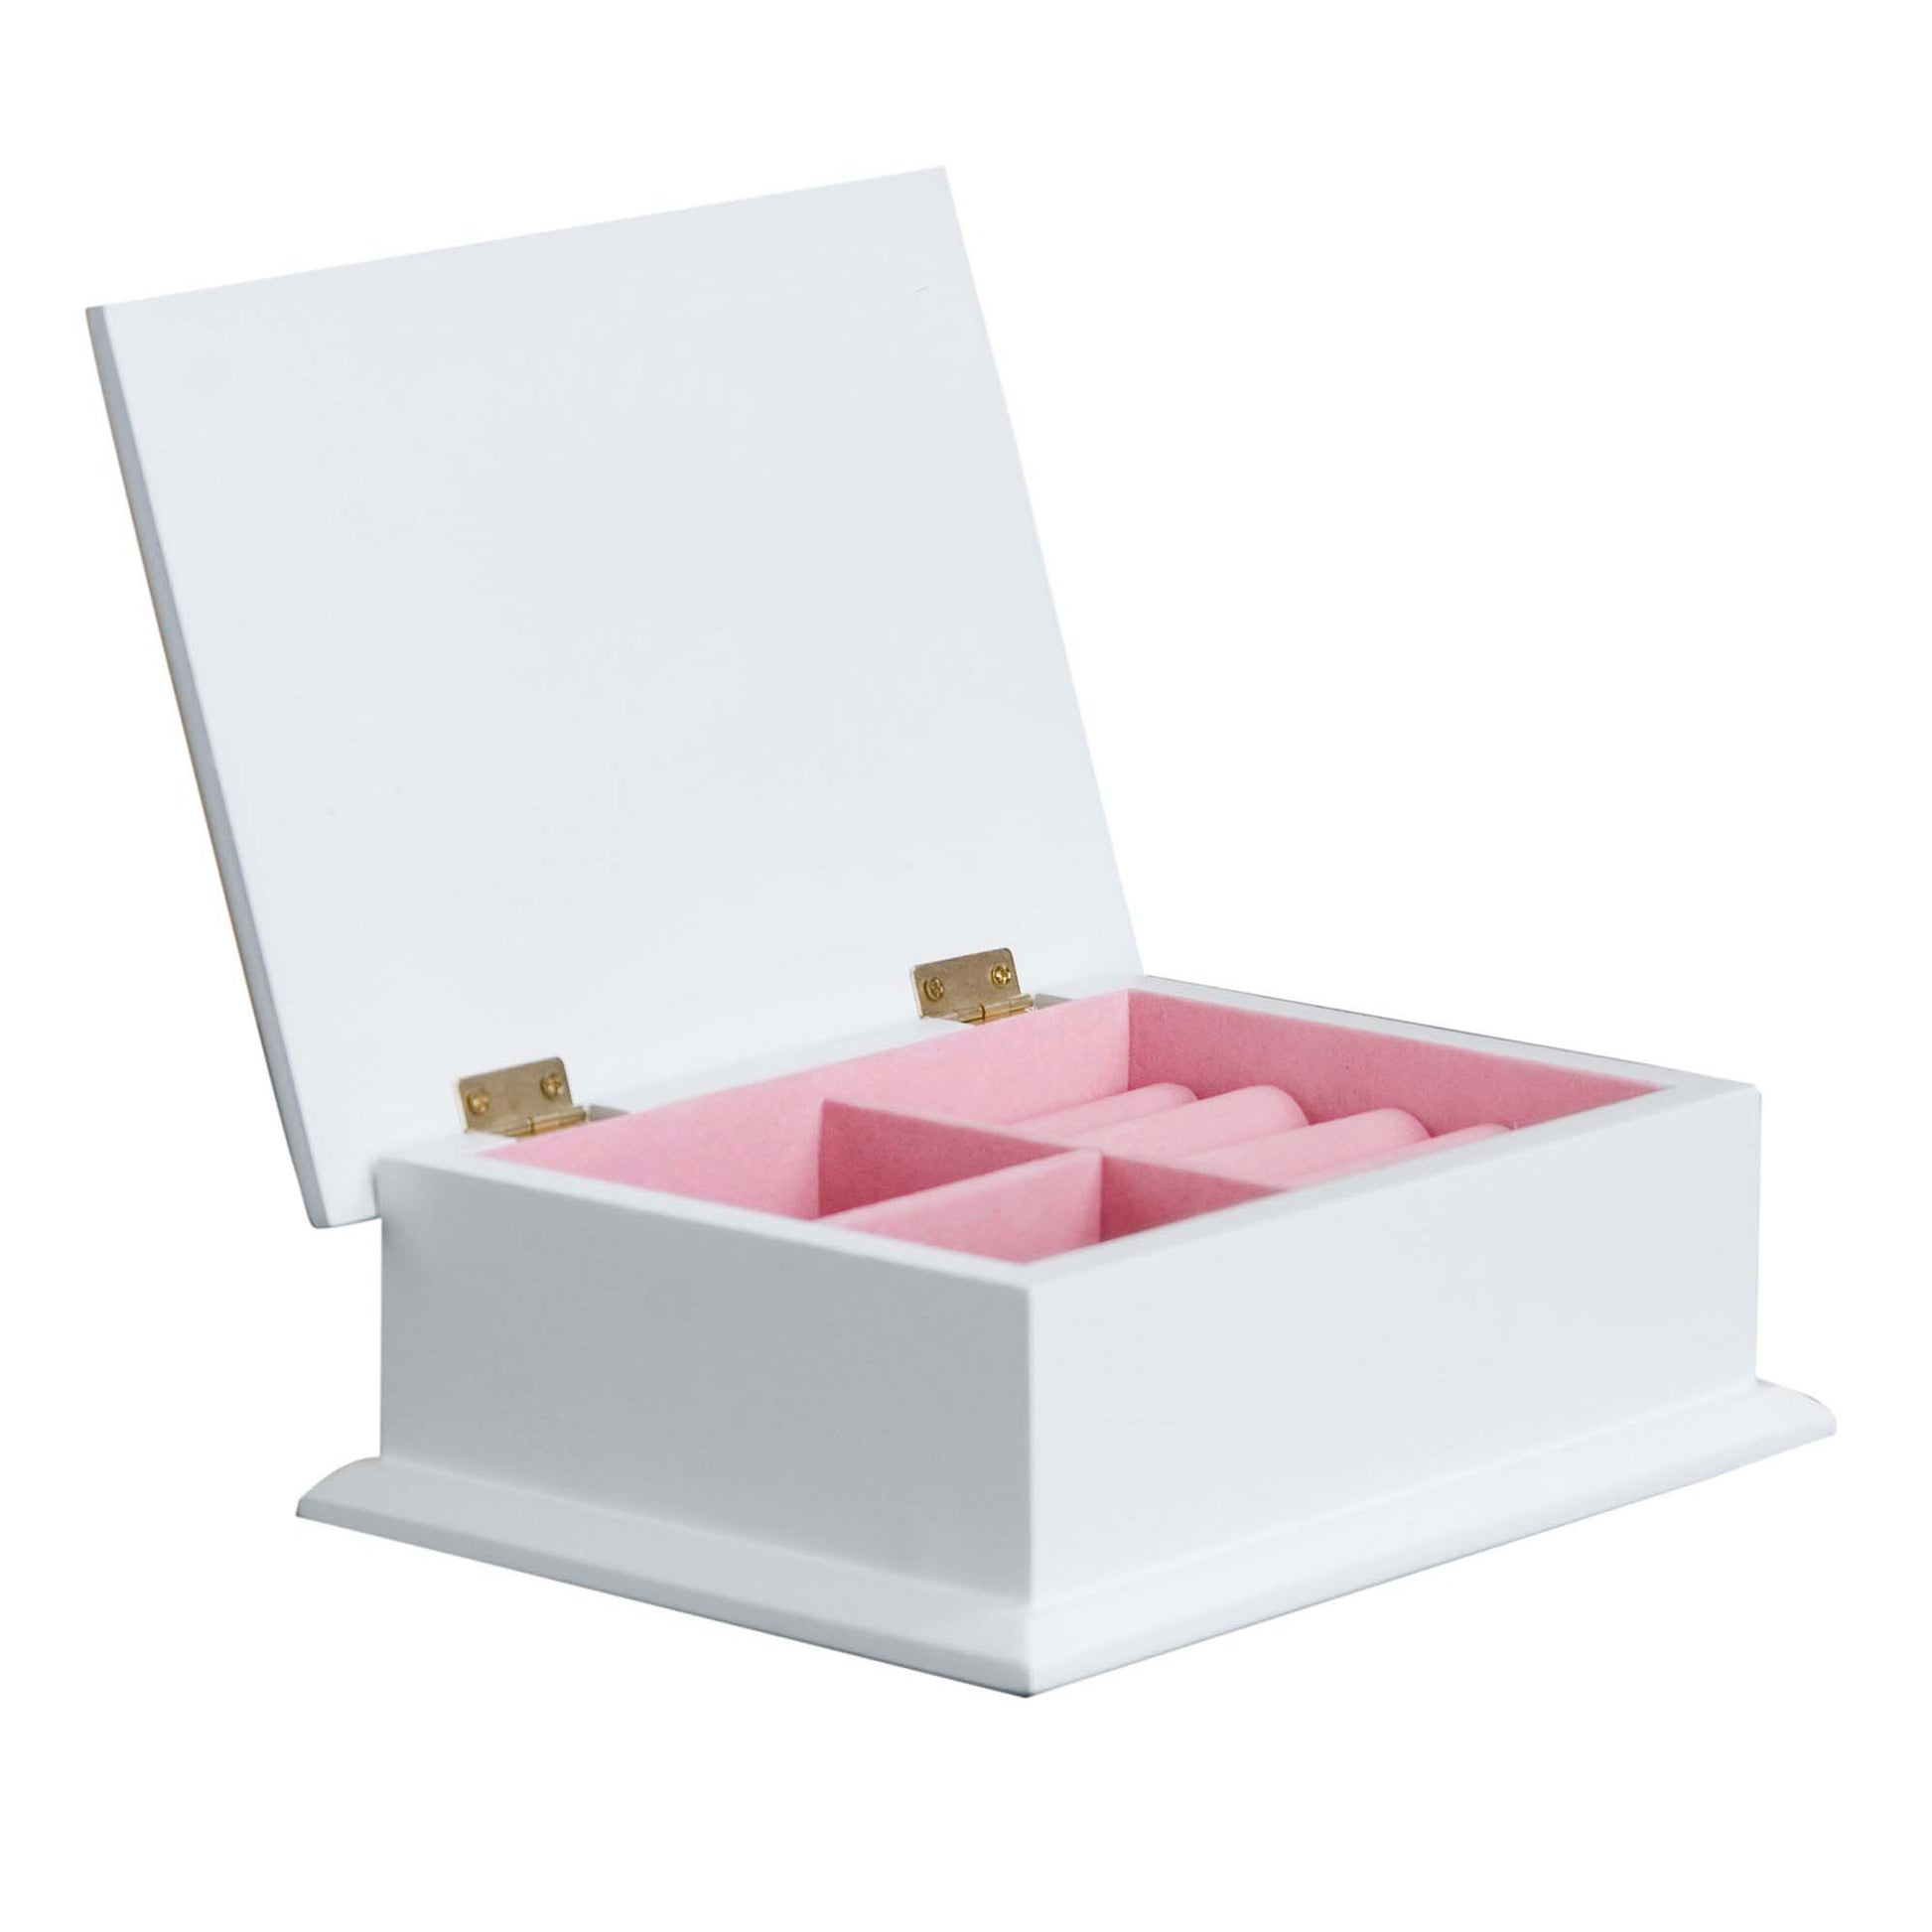 Personalized Lift Top Jewelry Box with Fairy Princess design